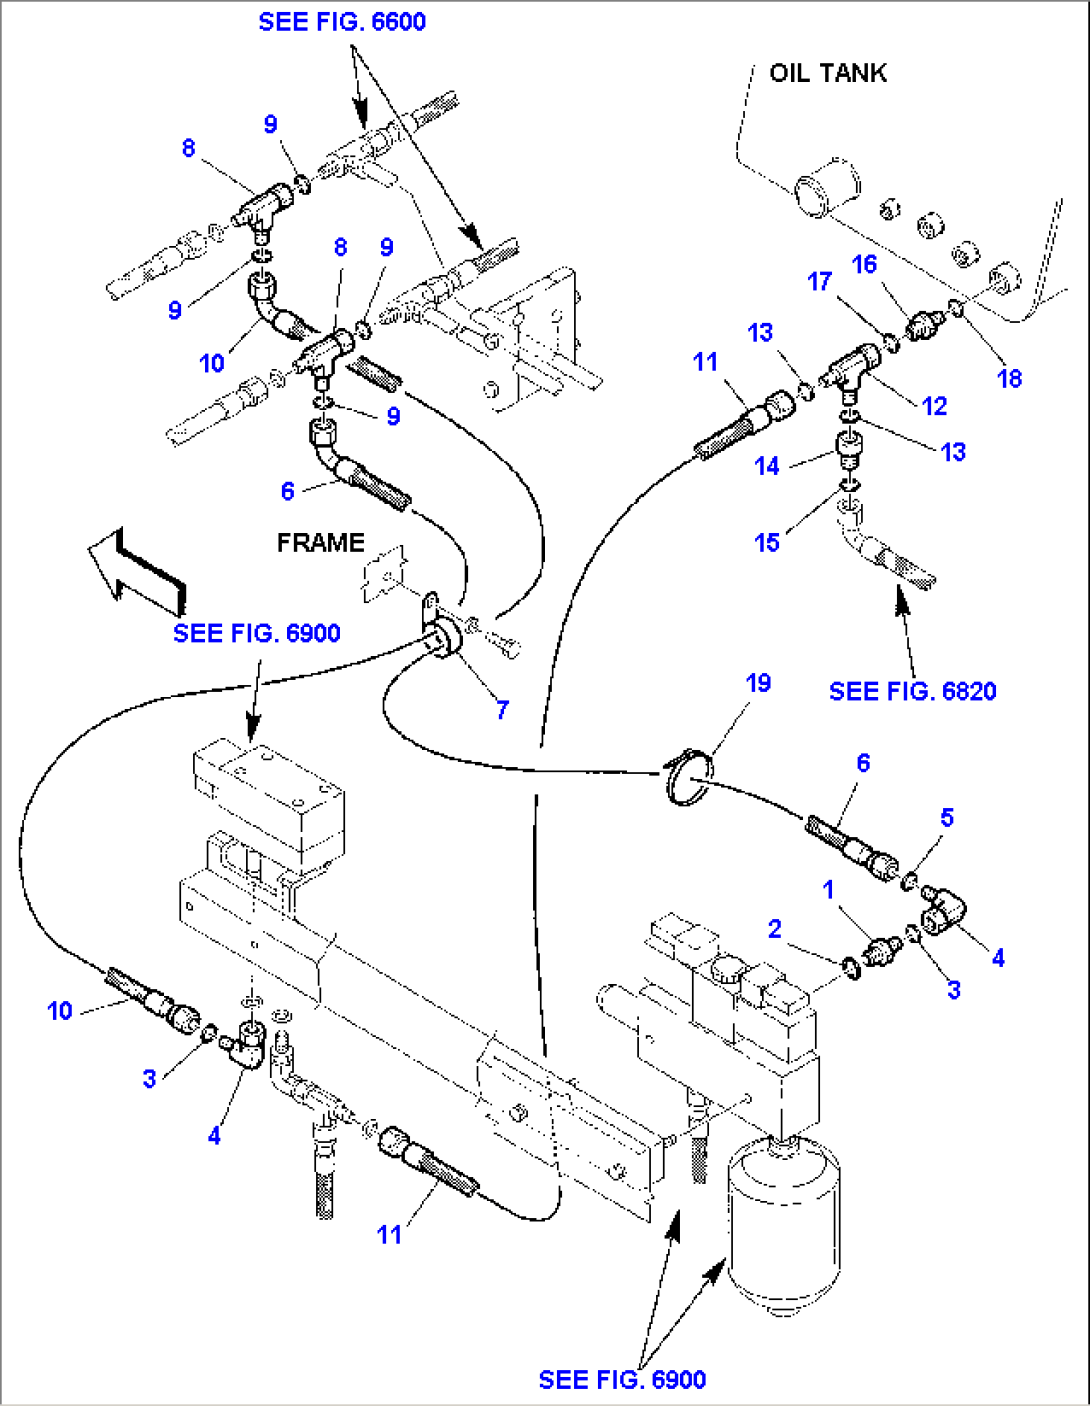 HYDRAULIC PIPING (RIDE CONTROL) (WITH HAMMER) (2/2) (OPTIONAL)